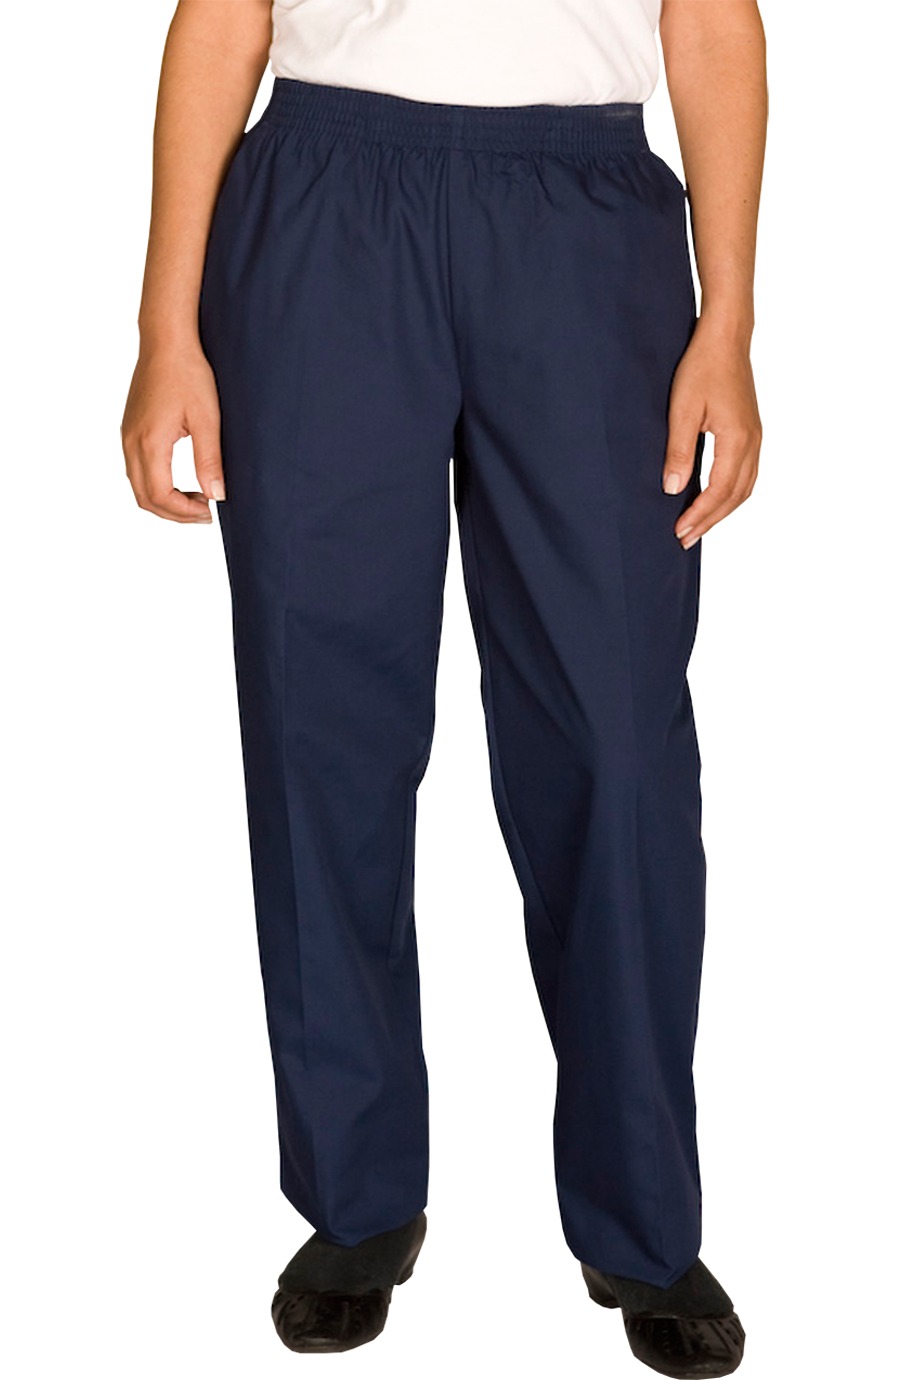 Edwards Garment 8886 - Women's Poly/Cotton Pull-On-Pant